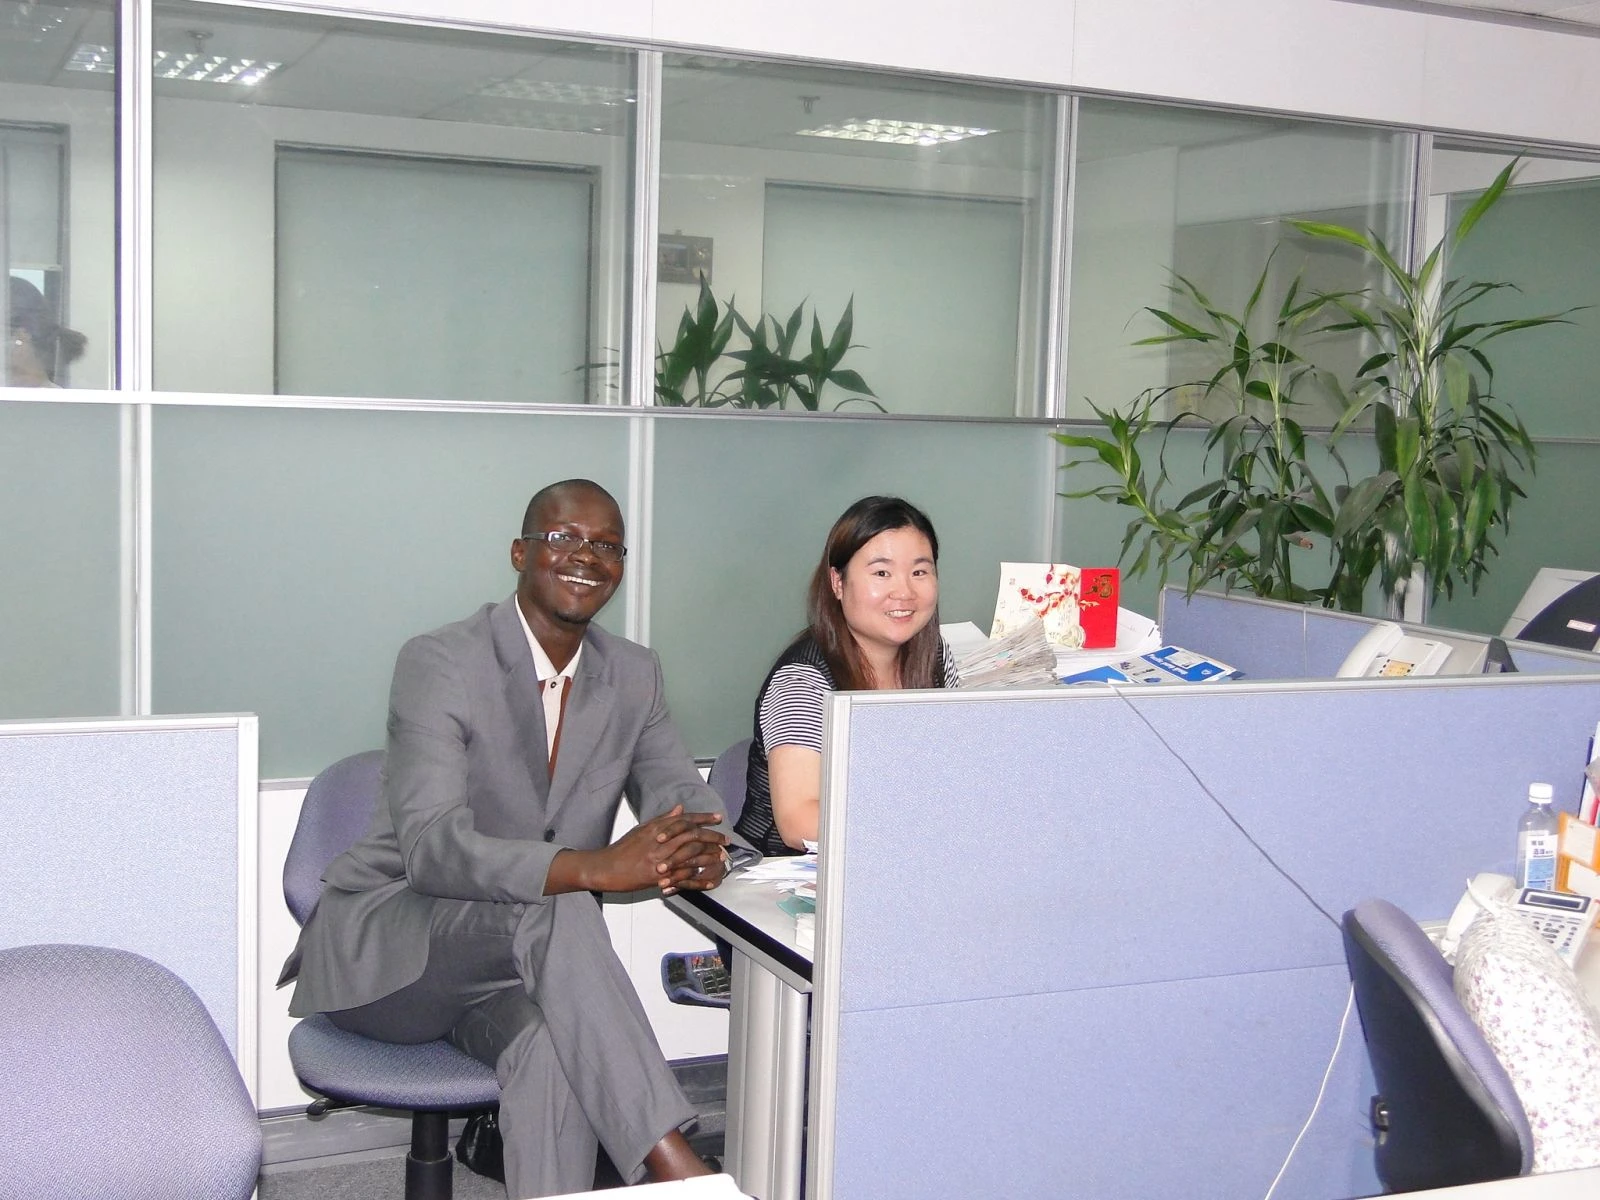 Burkina Faso Client works with Manager Zhang for Valves, Pipes, Flanges, Pipe Fittings, etc.